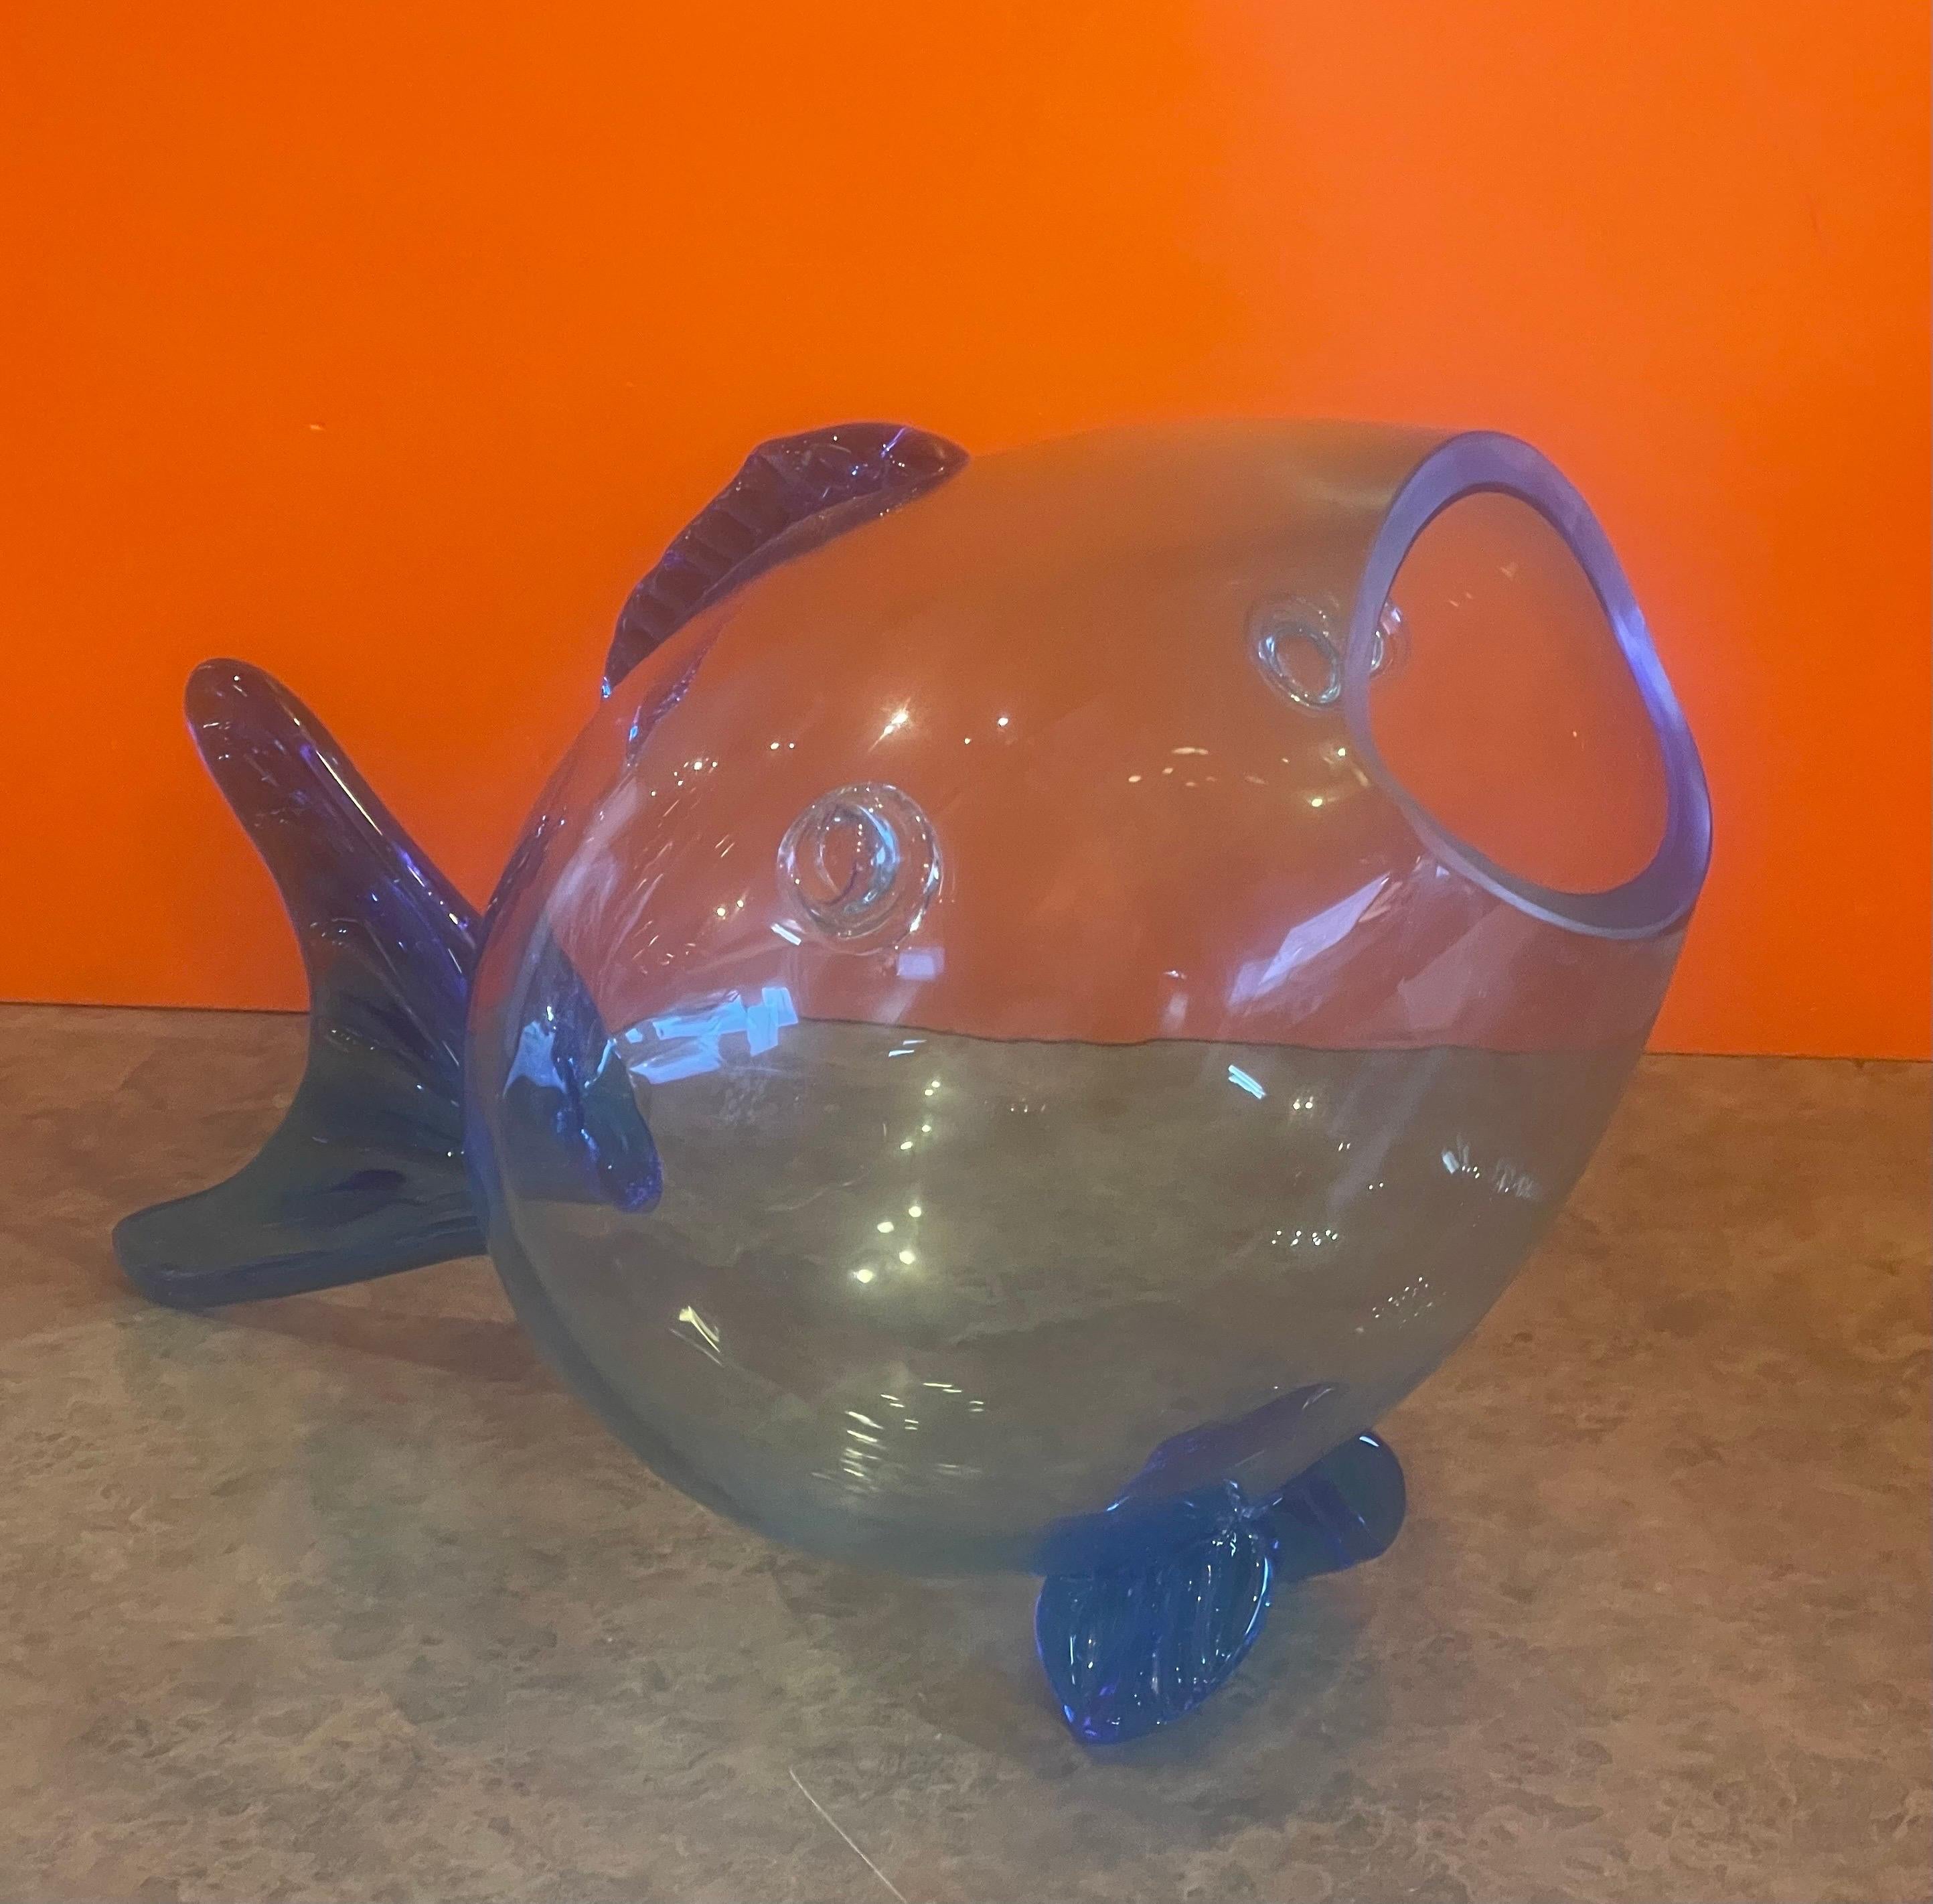 Fun mid-century blue glass fish vase in the style of Blenko Glass, circa 1970s. The vase is in very good vintage condition with no chips or cracks and measures 15.75